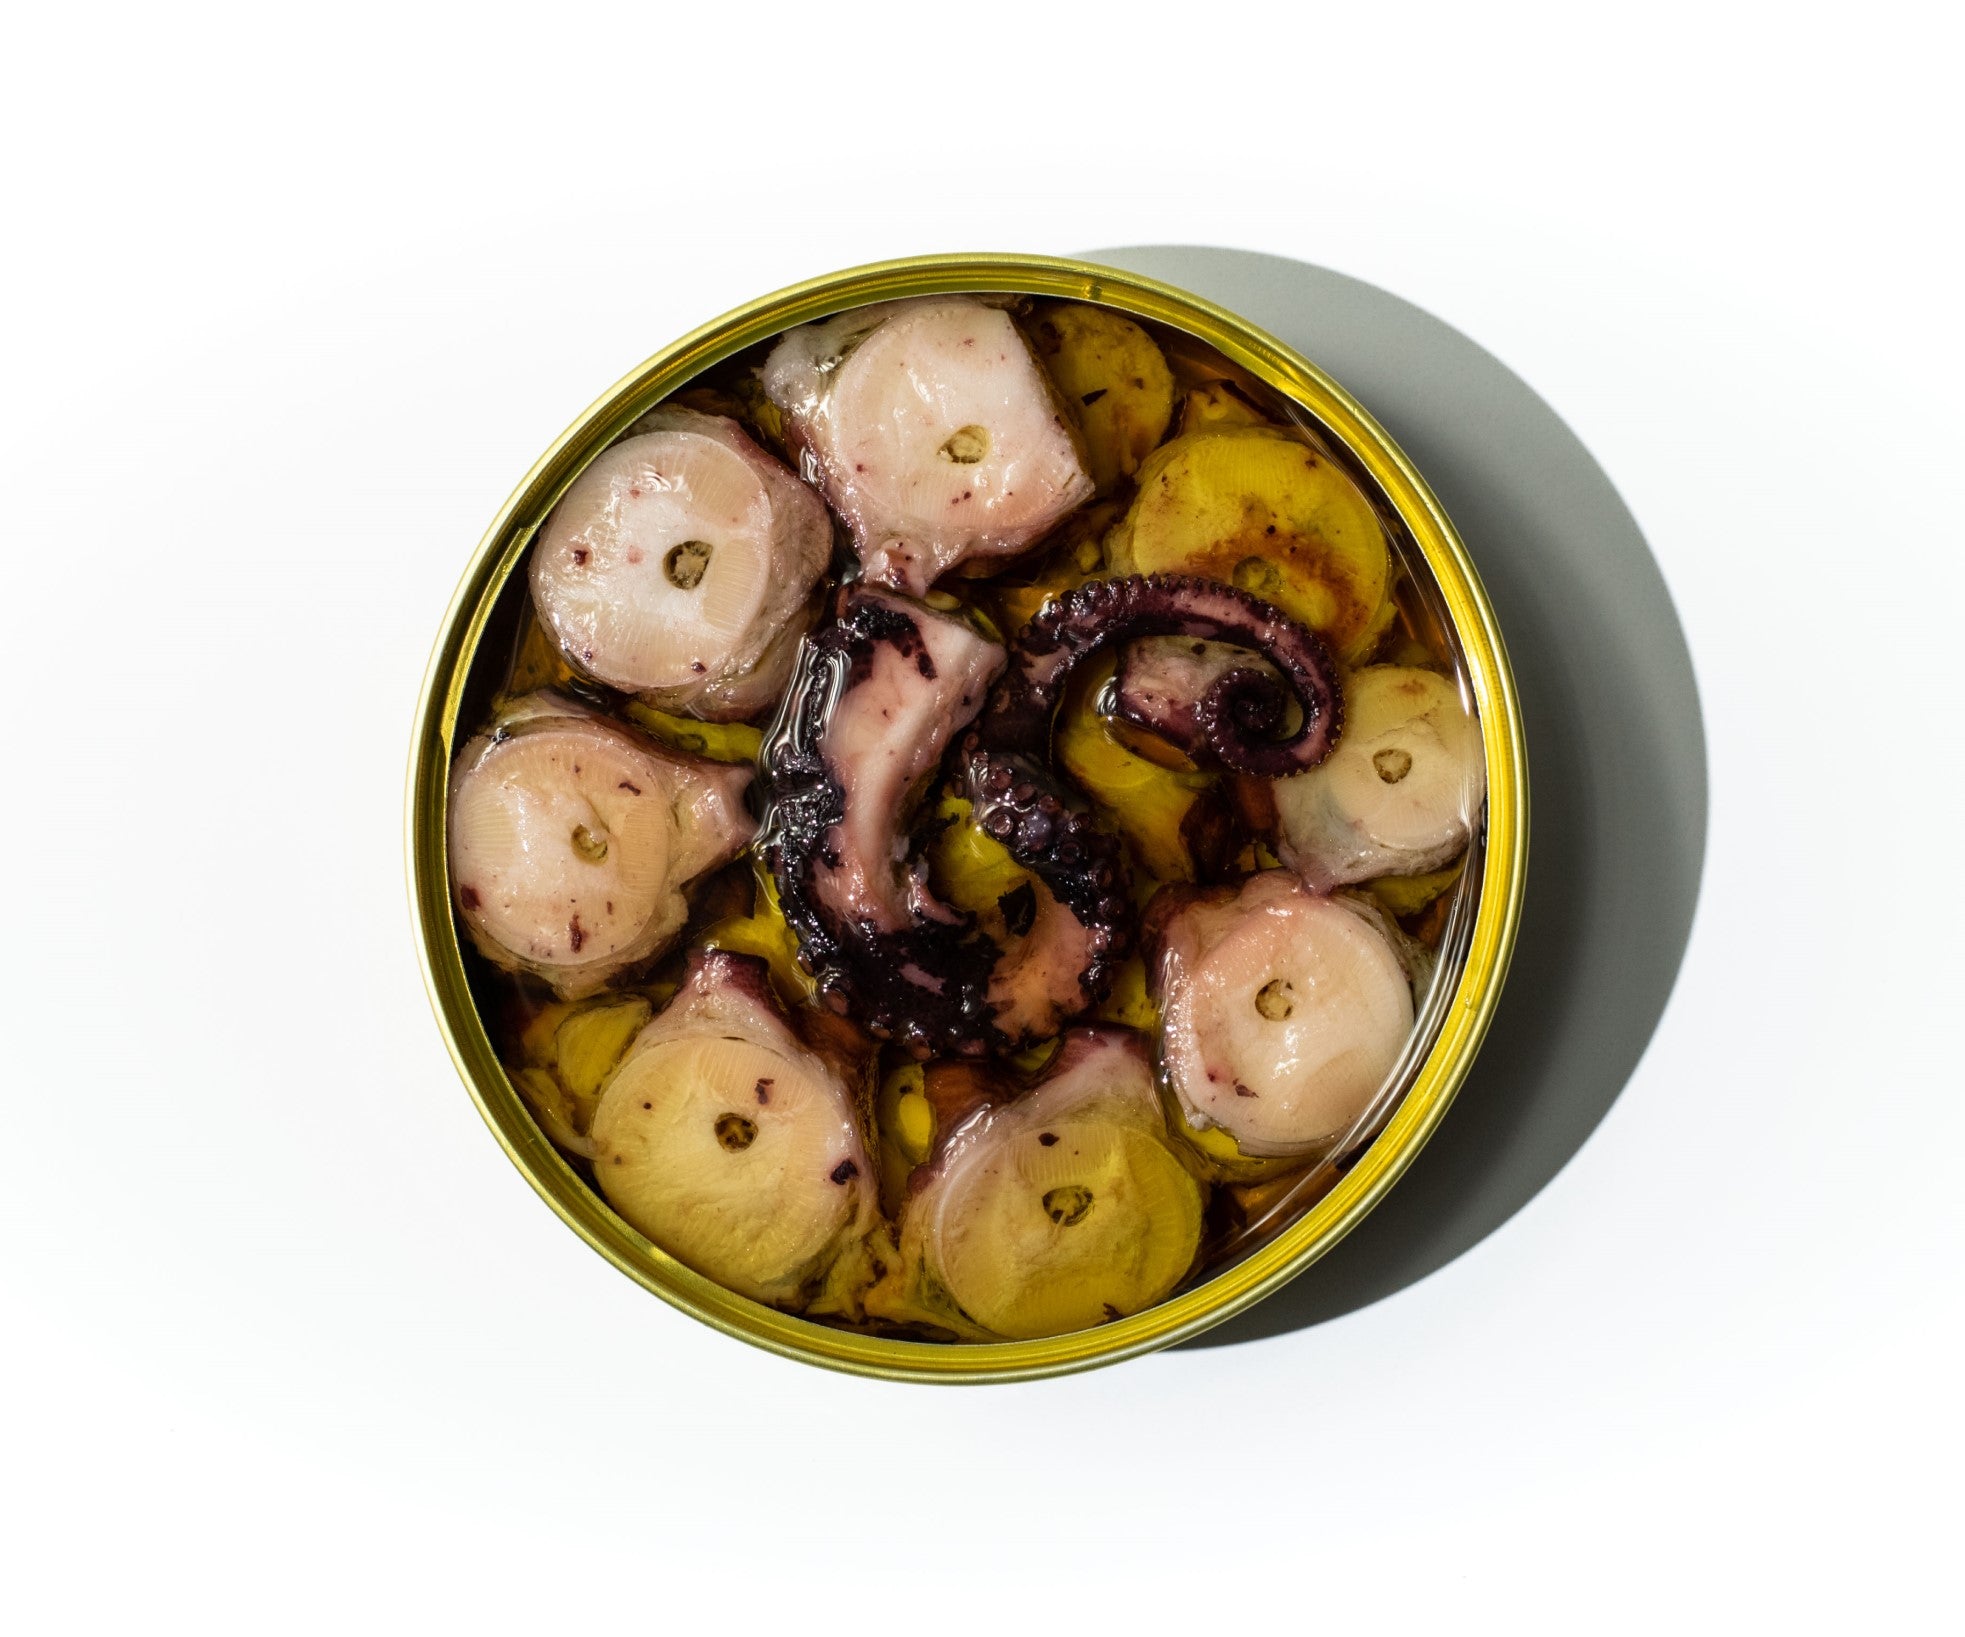 Los Peperetes Octopus in Olive Oil